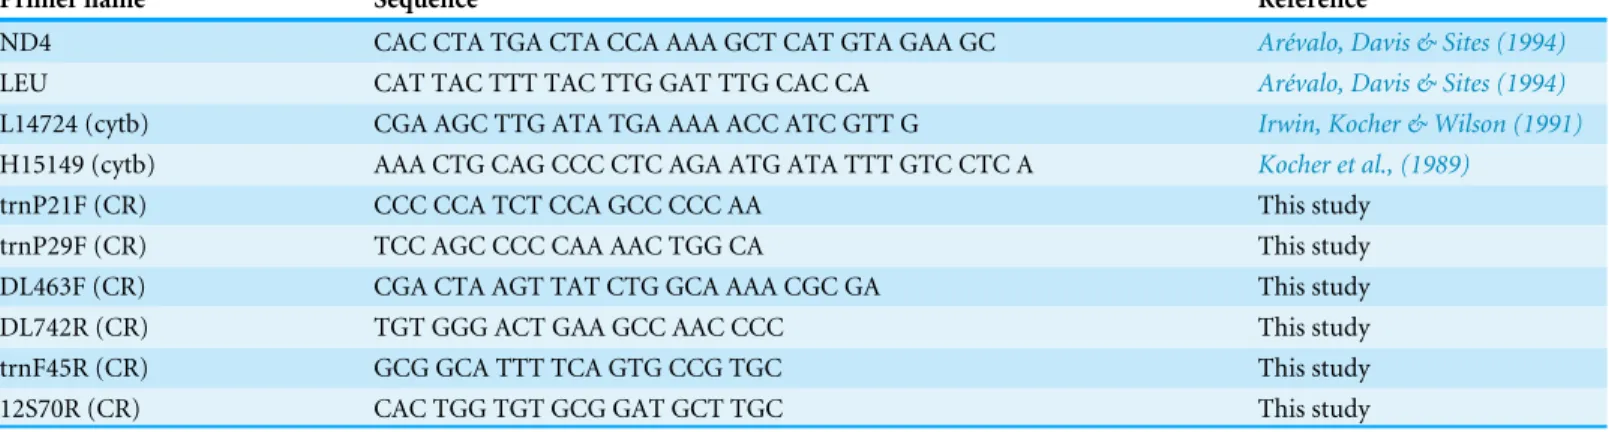 Table 1 Primer pairs used to sequence three separate mitochondrial DNA regions (ND4-LEU, cytochrome b (cytB), and Control Region (CR)) for Allen Cays Rock Iguana.